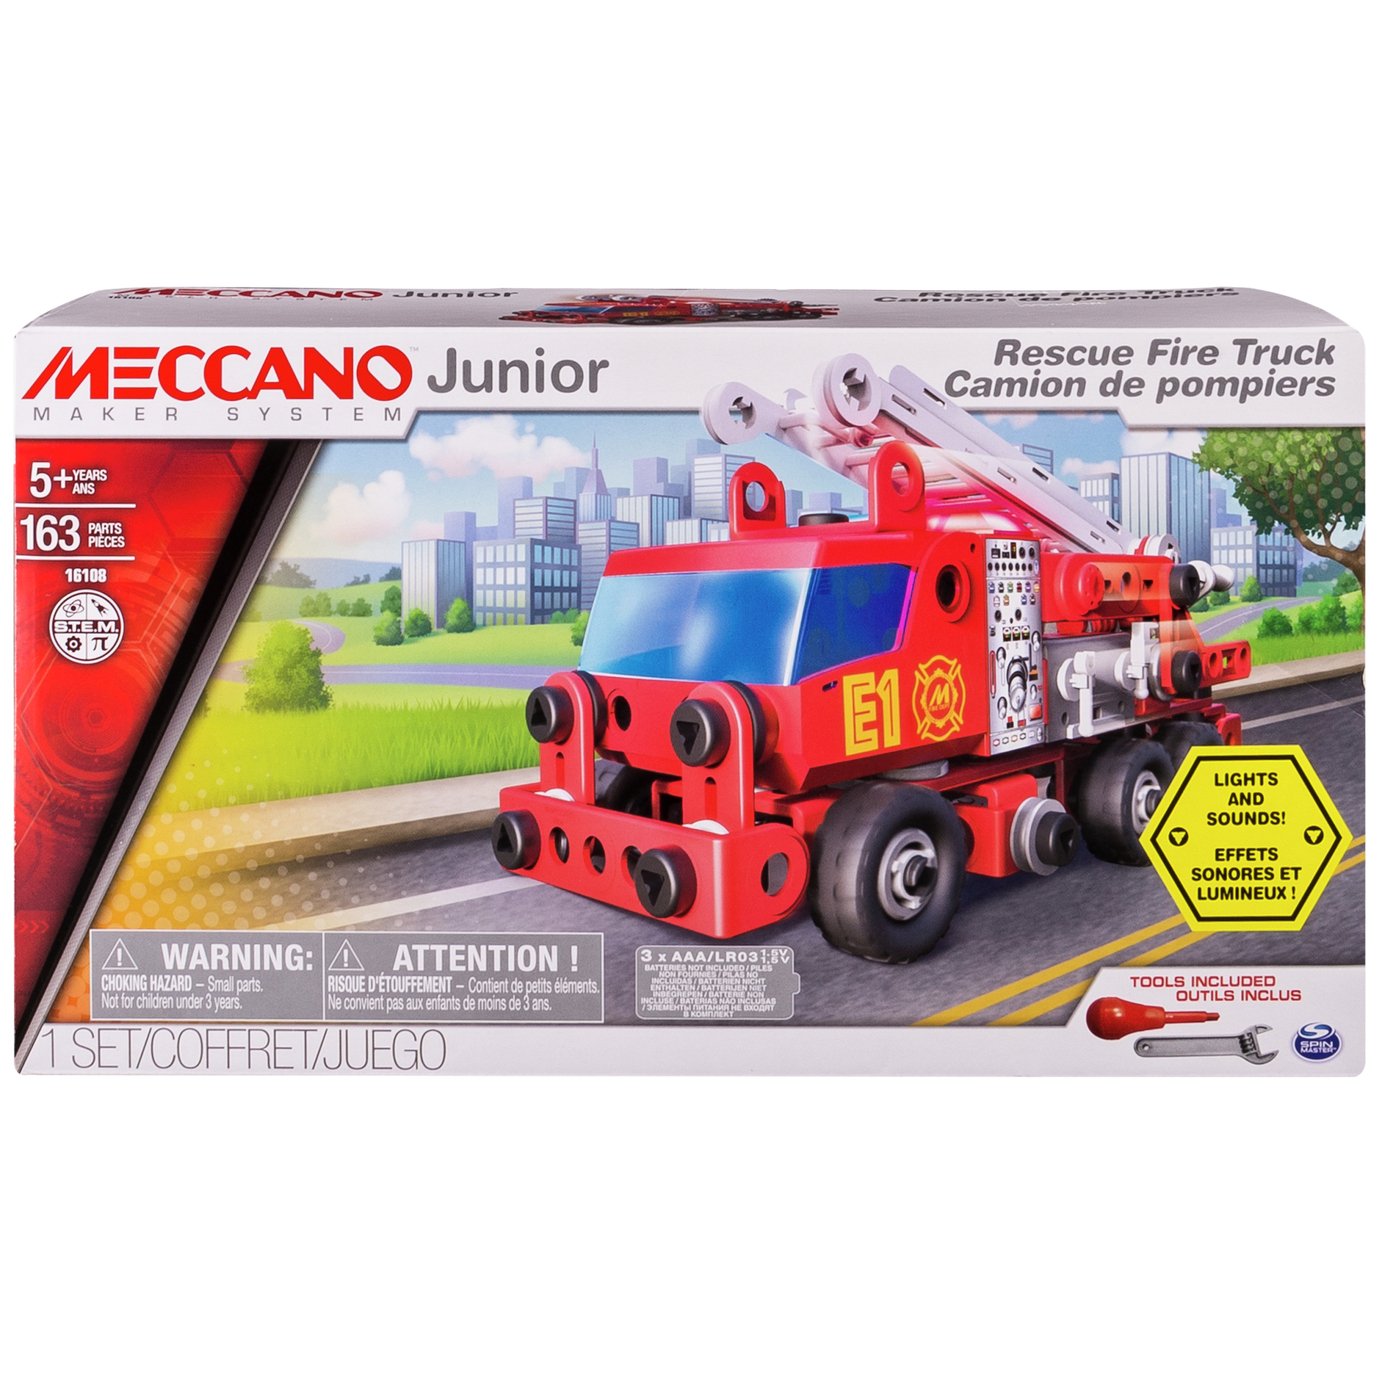 Meccano Junior Fire Engine Vehicle Review